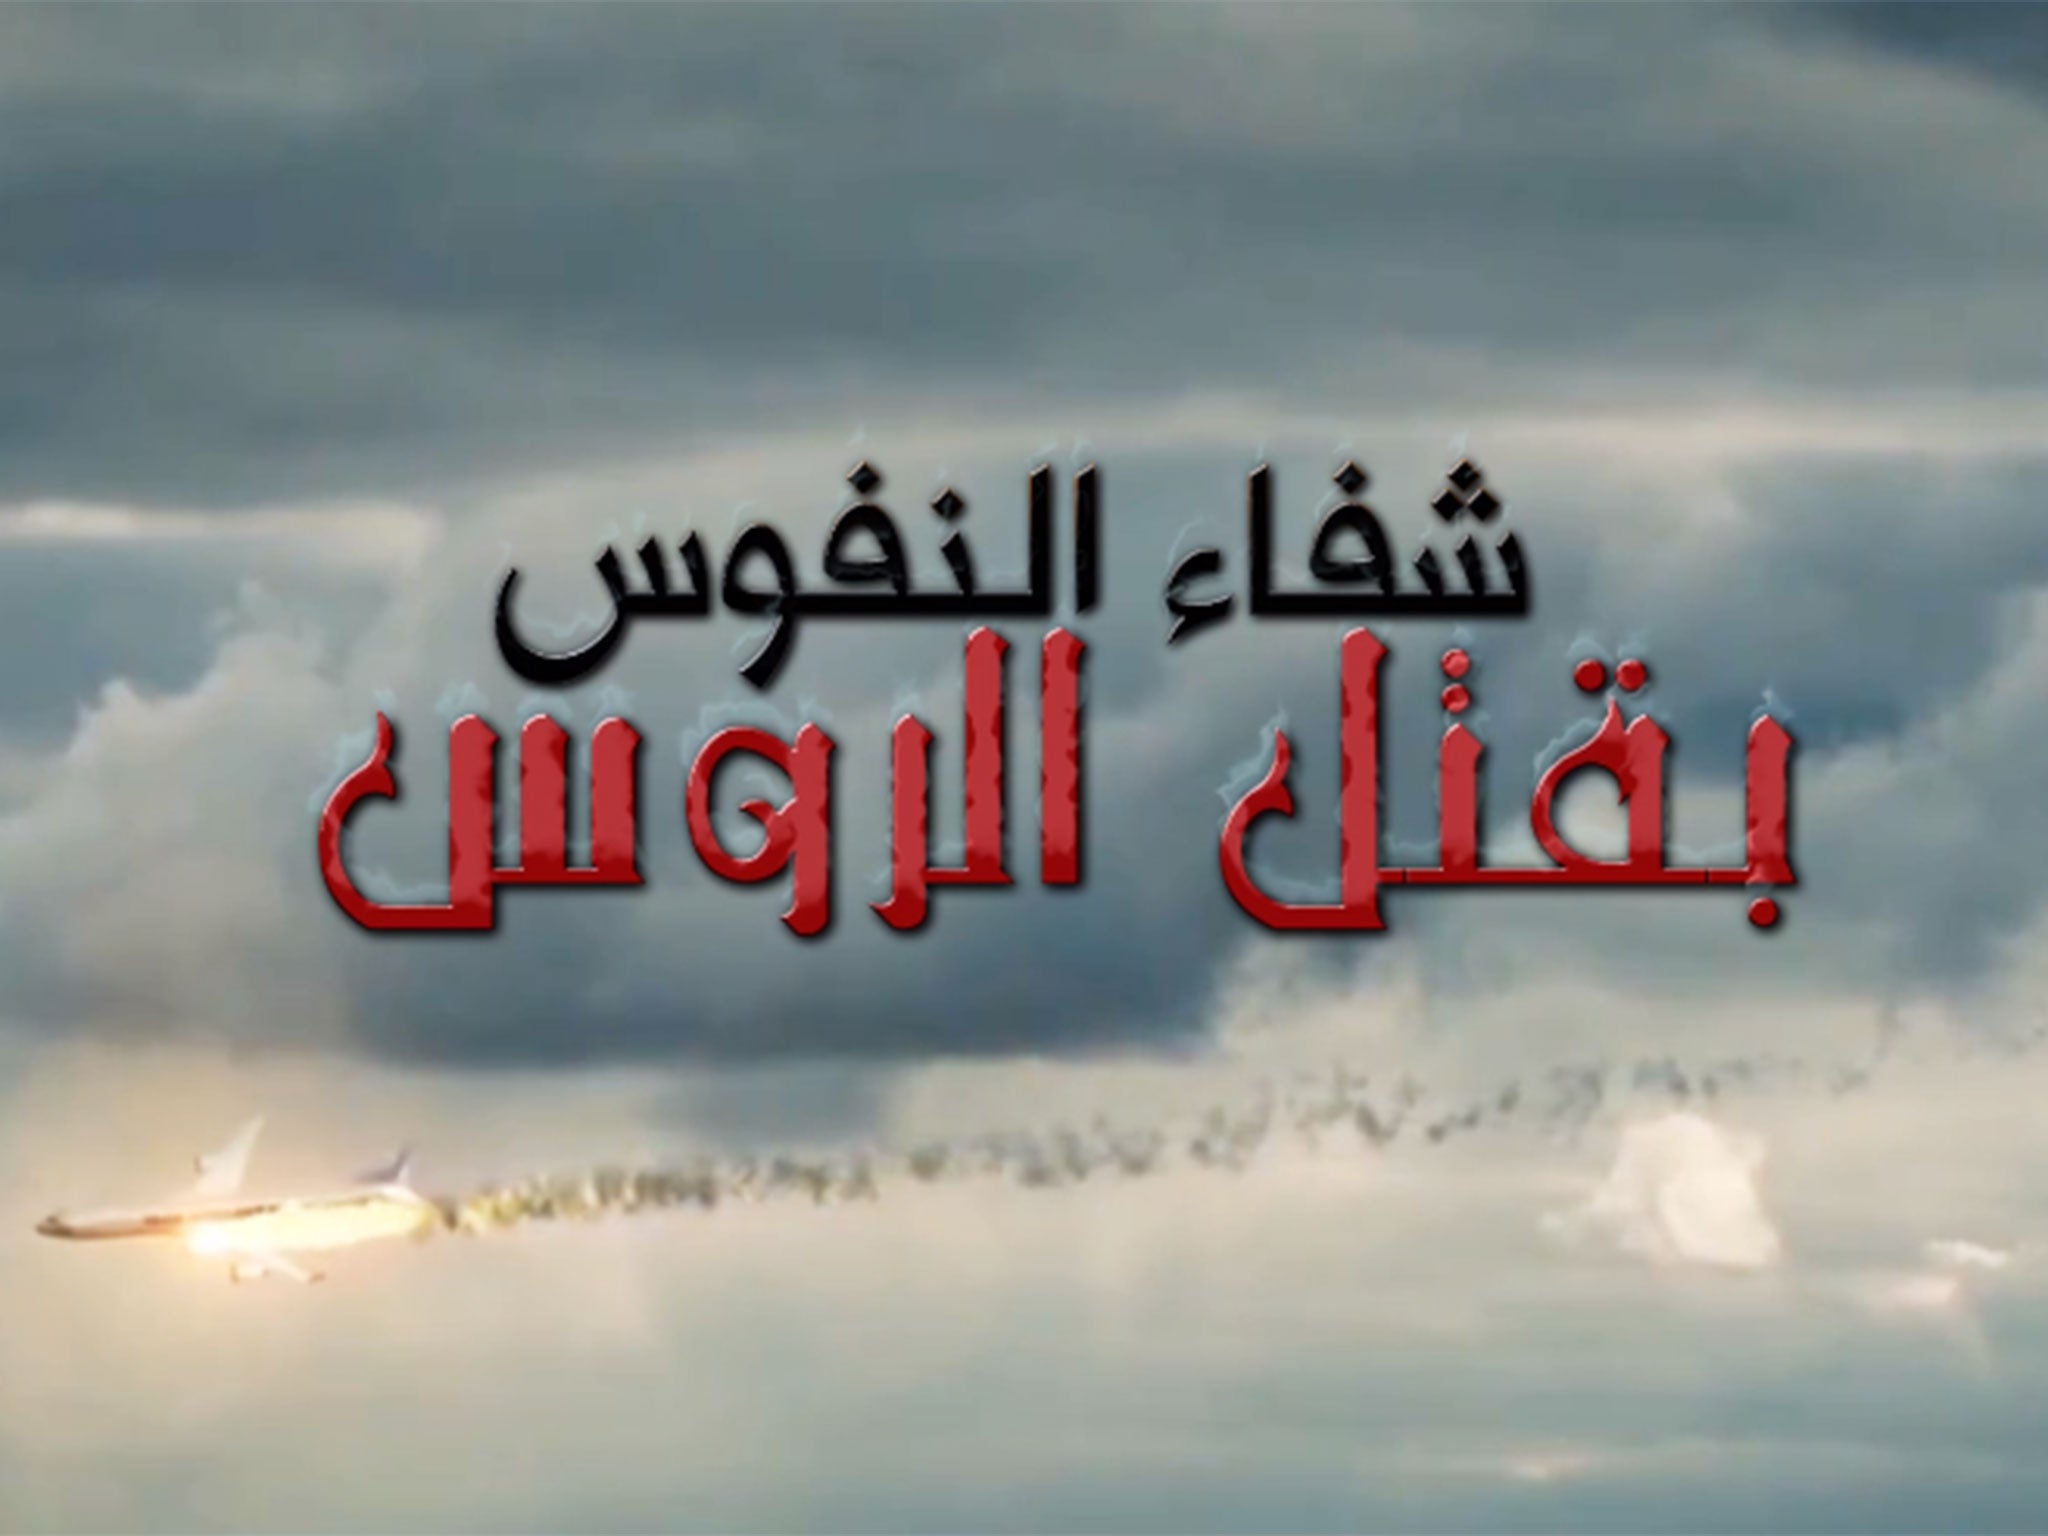 Screengrab from Isis video released by Aleppo province on 6 November 2015